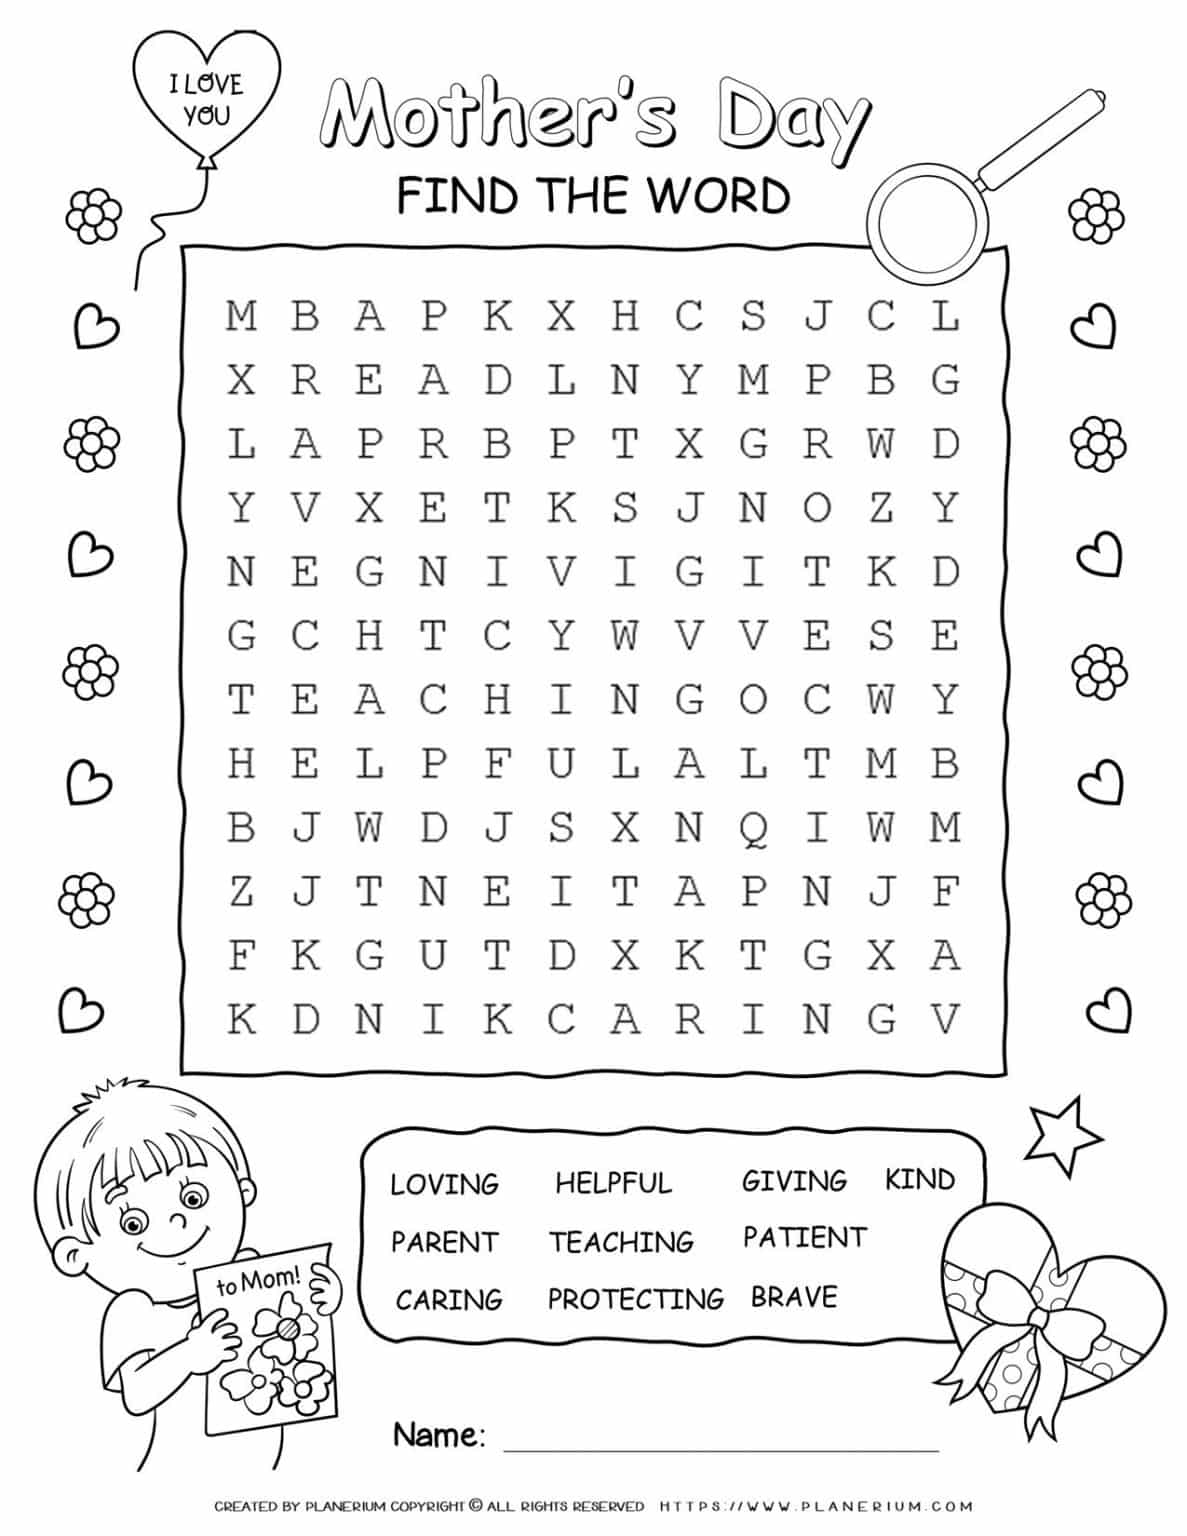 mother-s-day-word-search-puzzles-printable